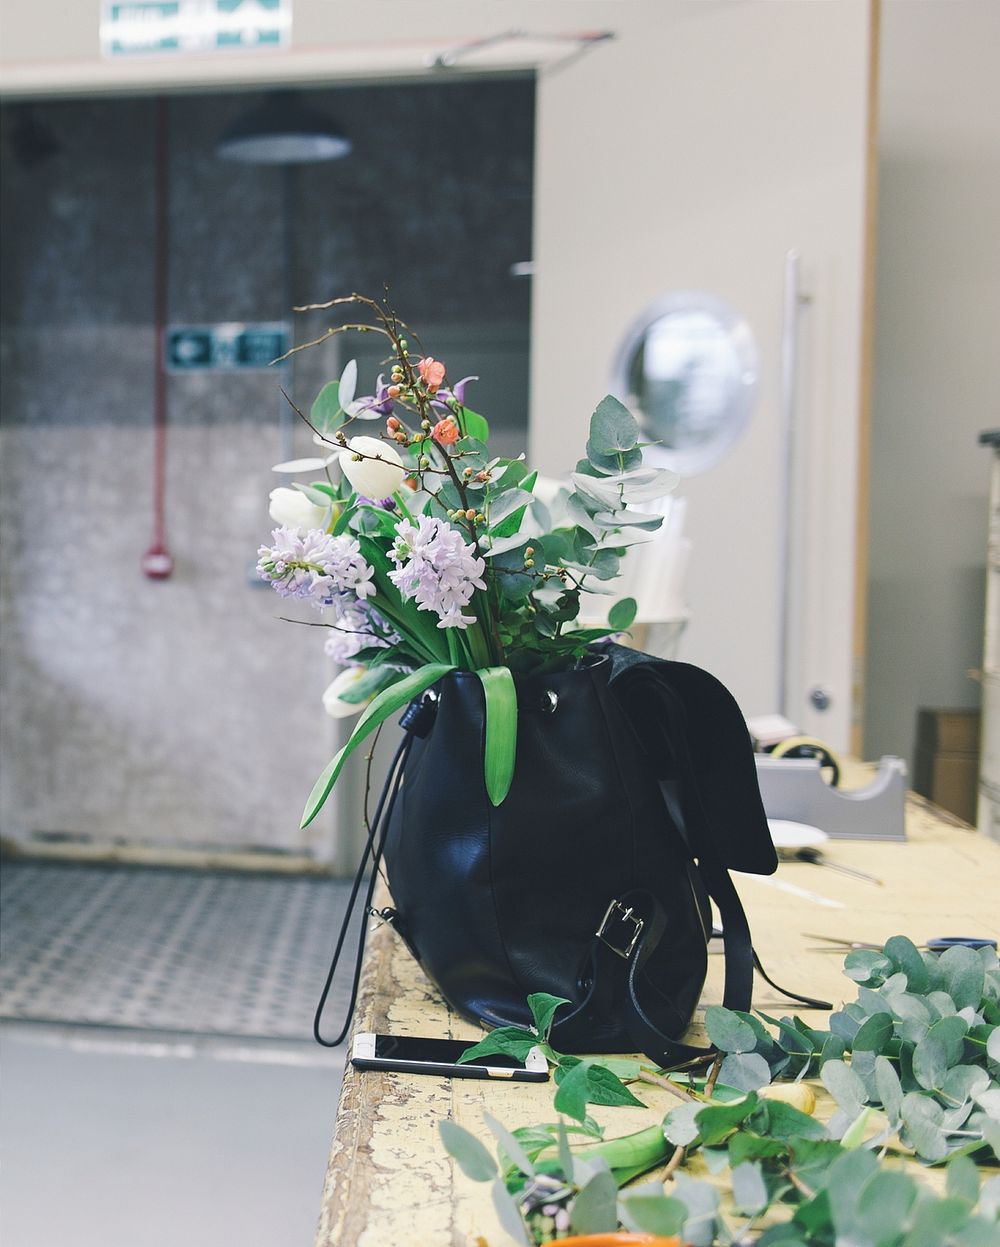 Florist's backpack full of flowers and leaves on workspace tabletop. Original public domain image from Wikimedia Commons